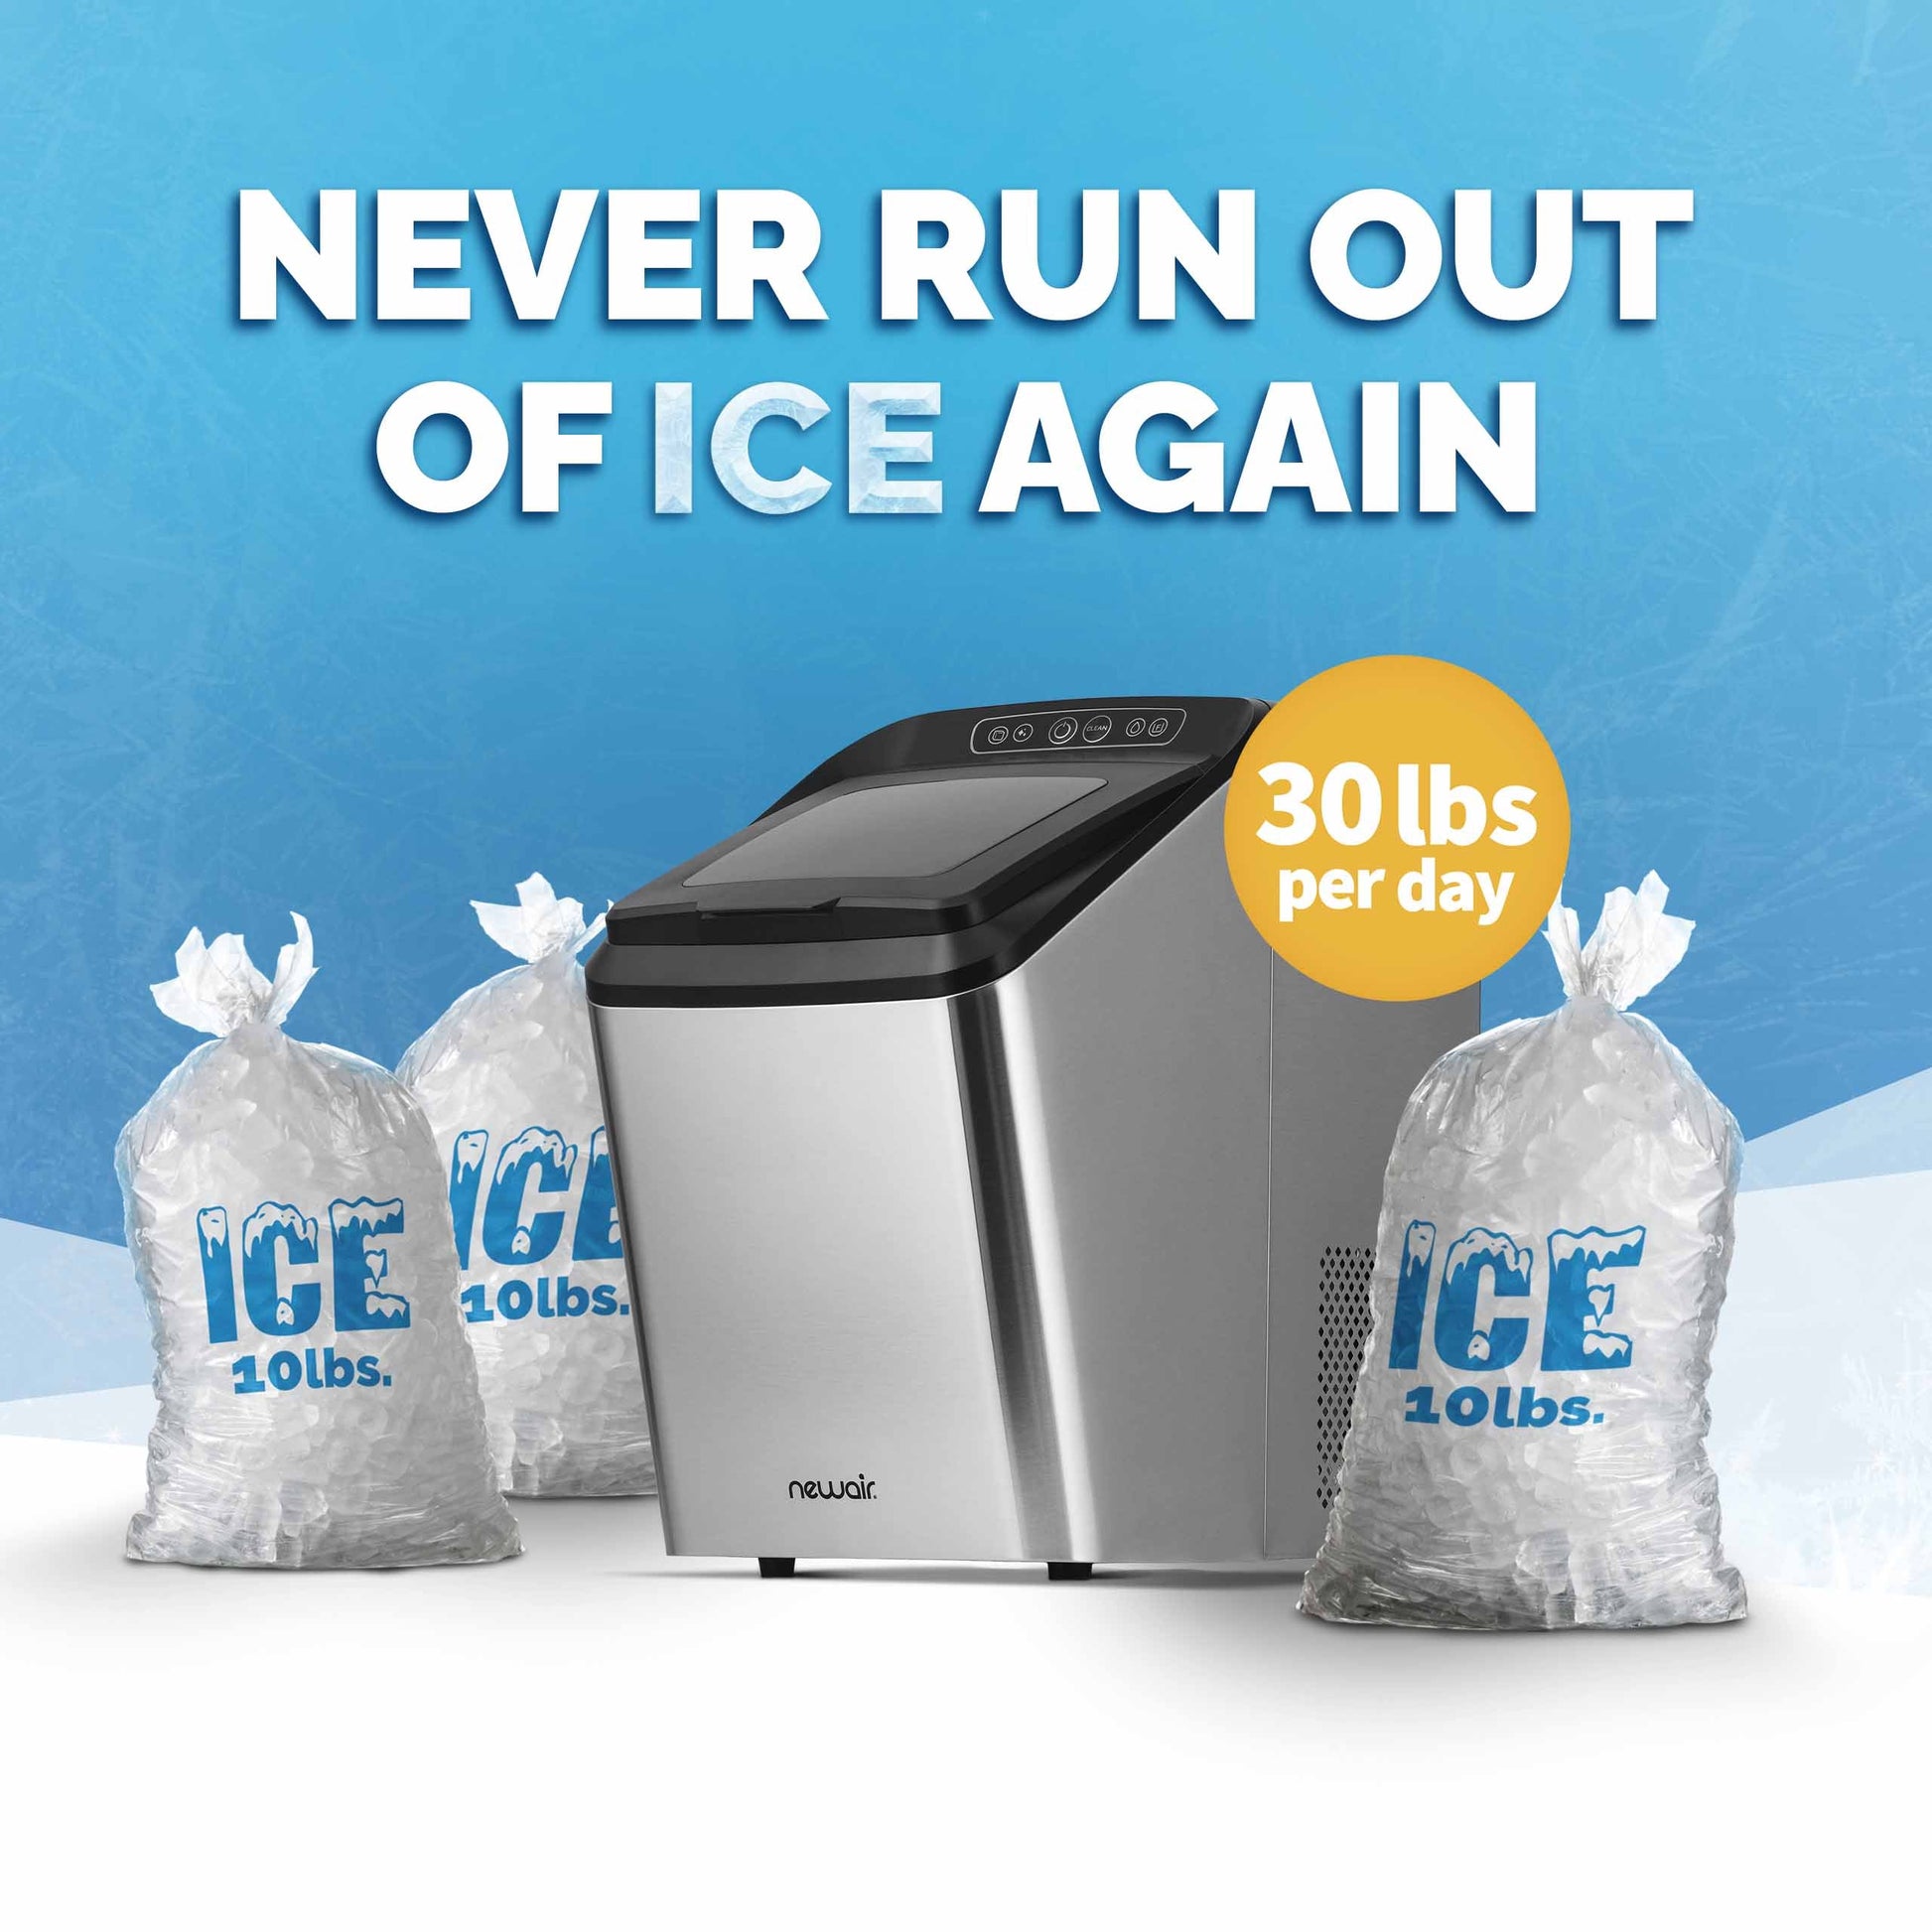 Newair 30 Lb. Countertop Nugget Ice Maker with Slim, Space-Saving Design, Self-Cleaning Function, Automatic Water Line and Refillable Water Tank, Perfect for Kitchens, Offices, Boats, and More